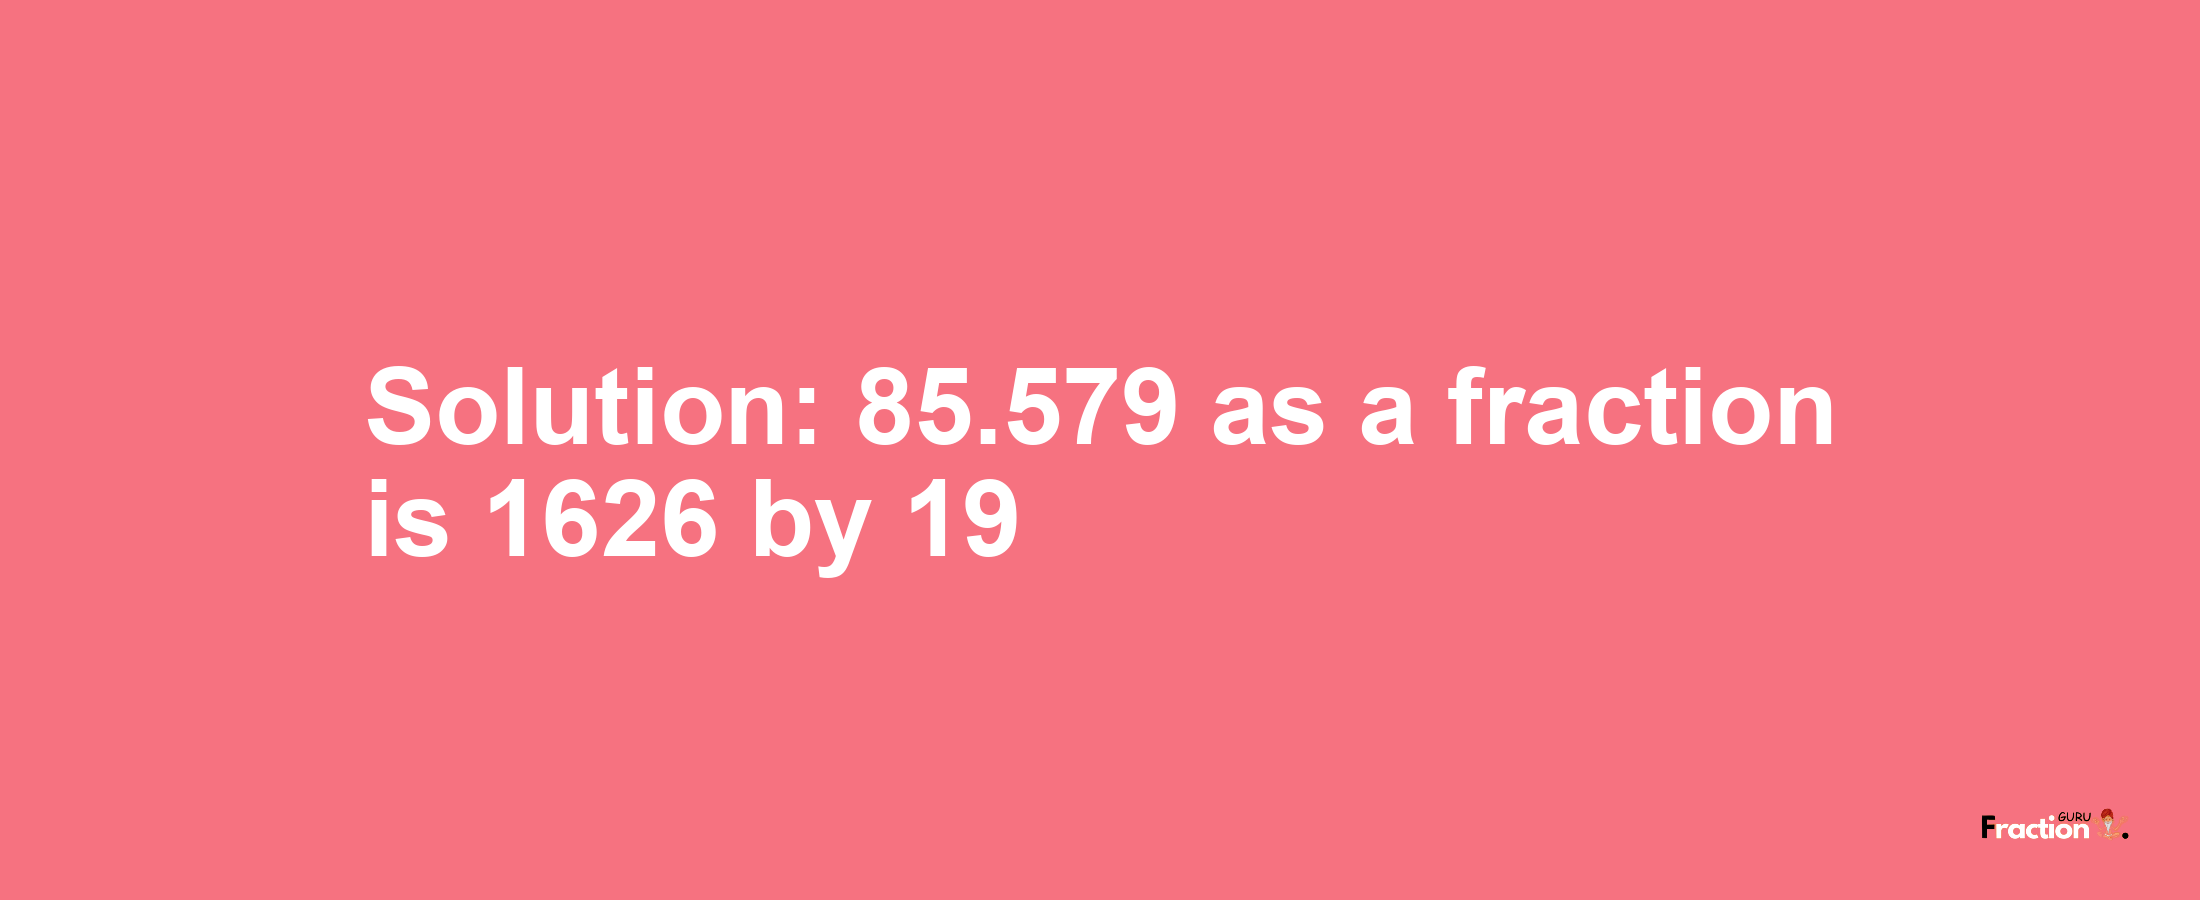 Solution:85.579 as a fraction is 1626/19